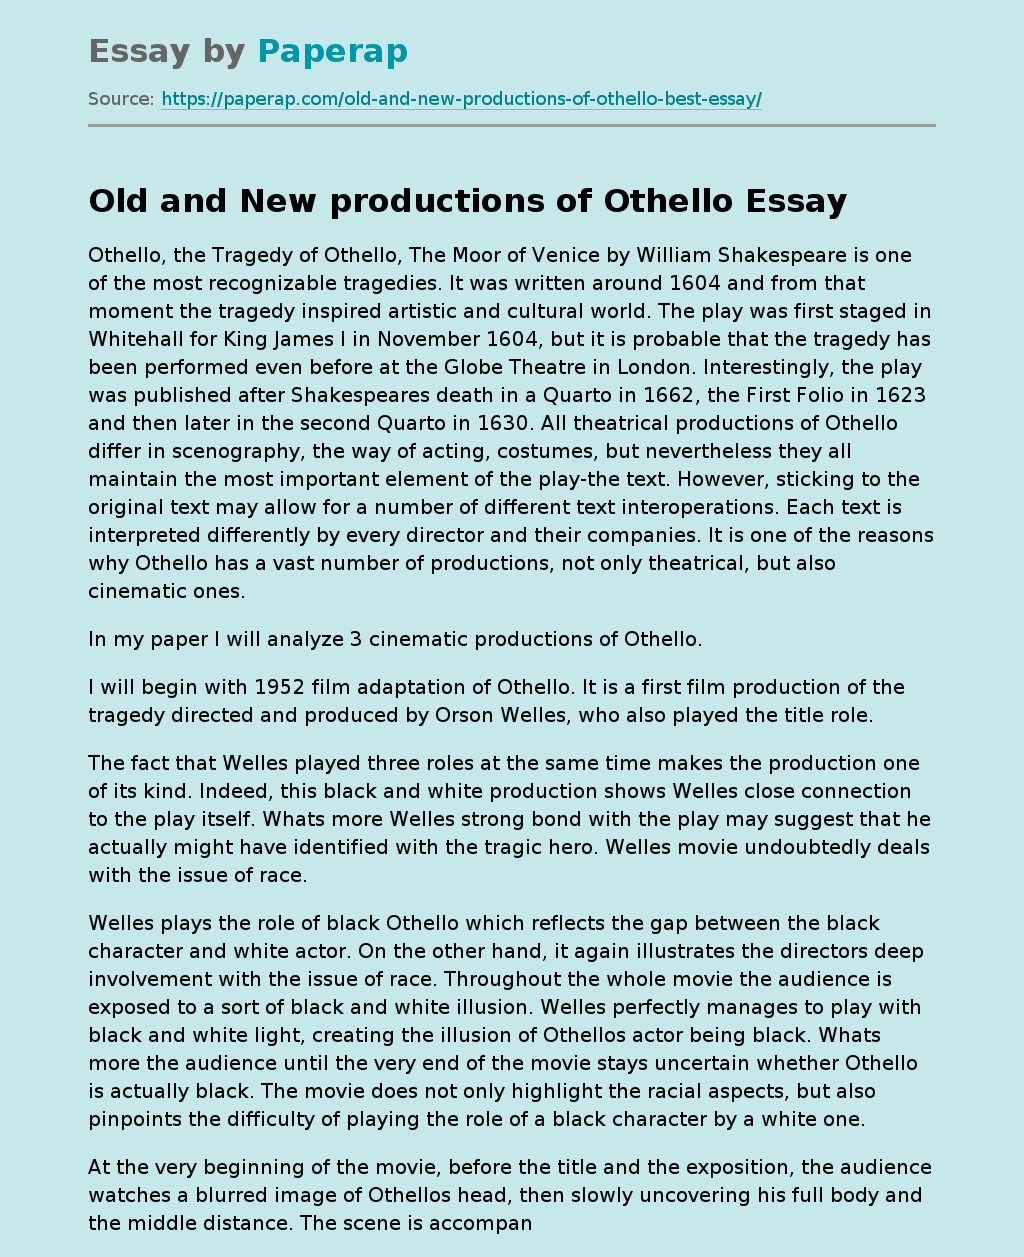 Old and New productions of Othello